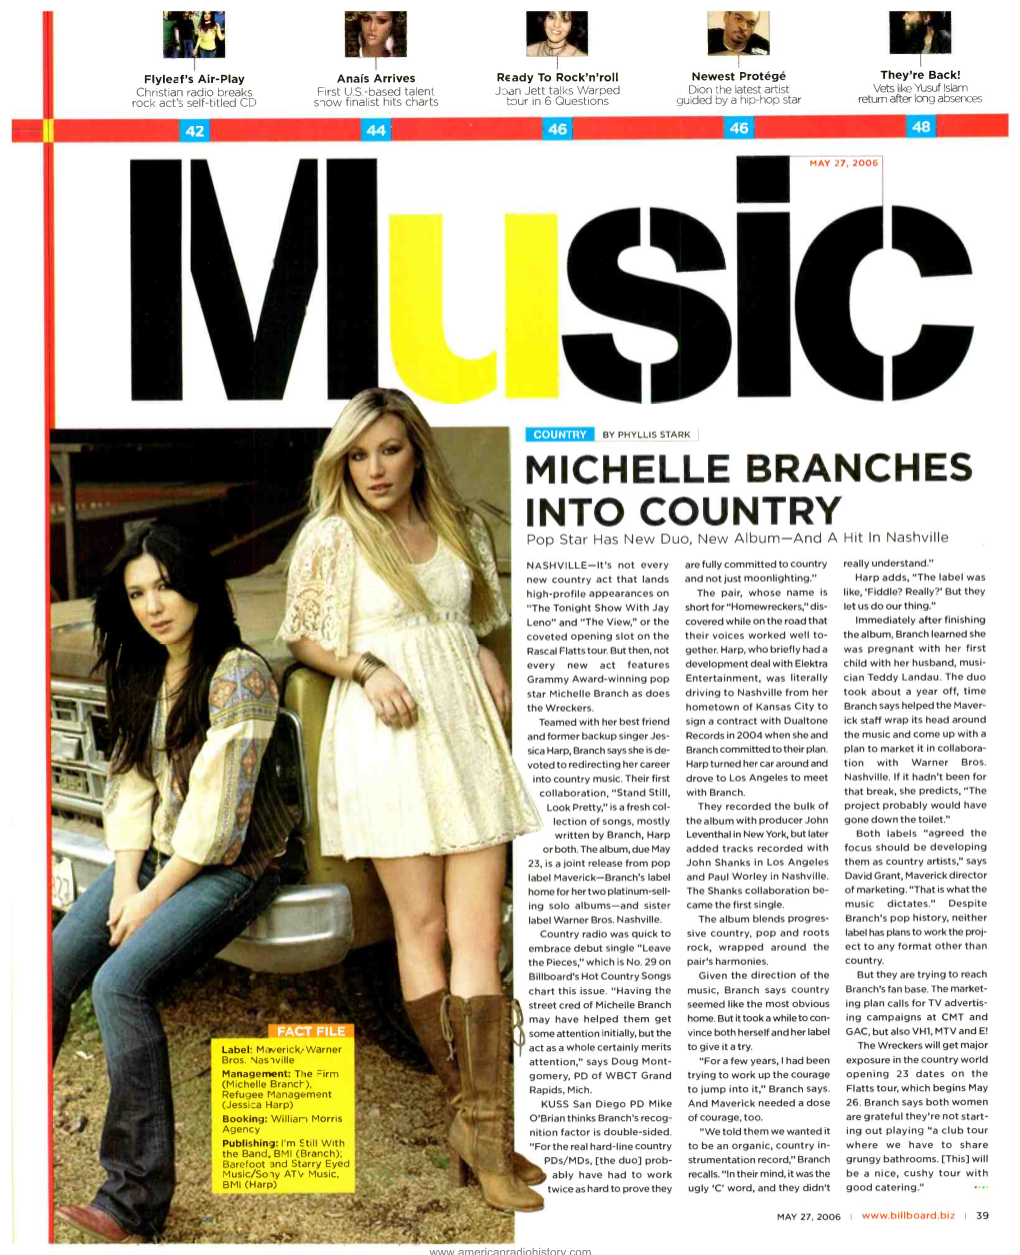 MICHELLE BRANCHES INTO COUNTRY Pop Star Has New Duo, New Album -And a Hit in Nashville